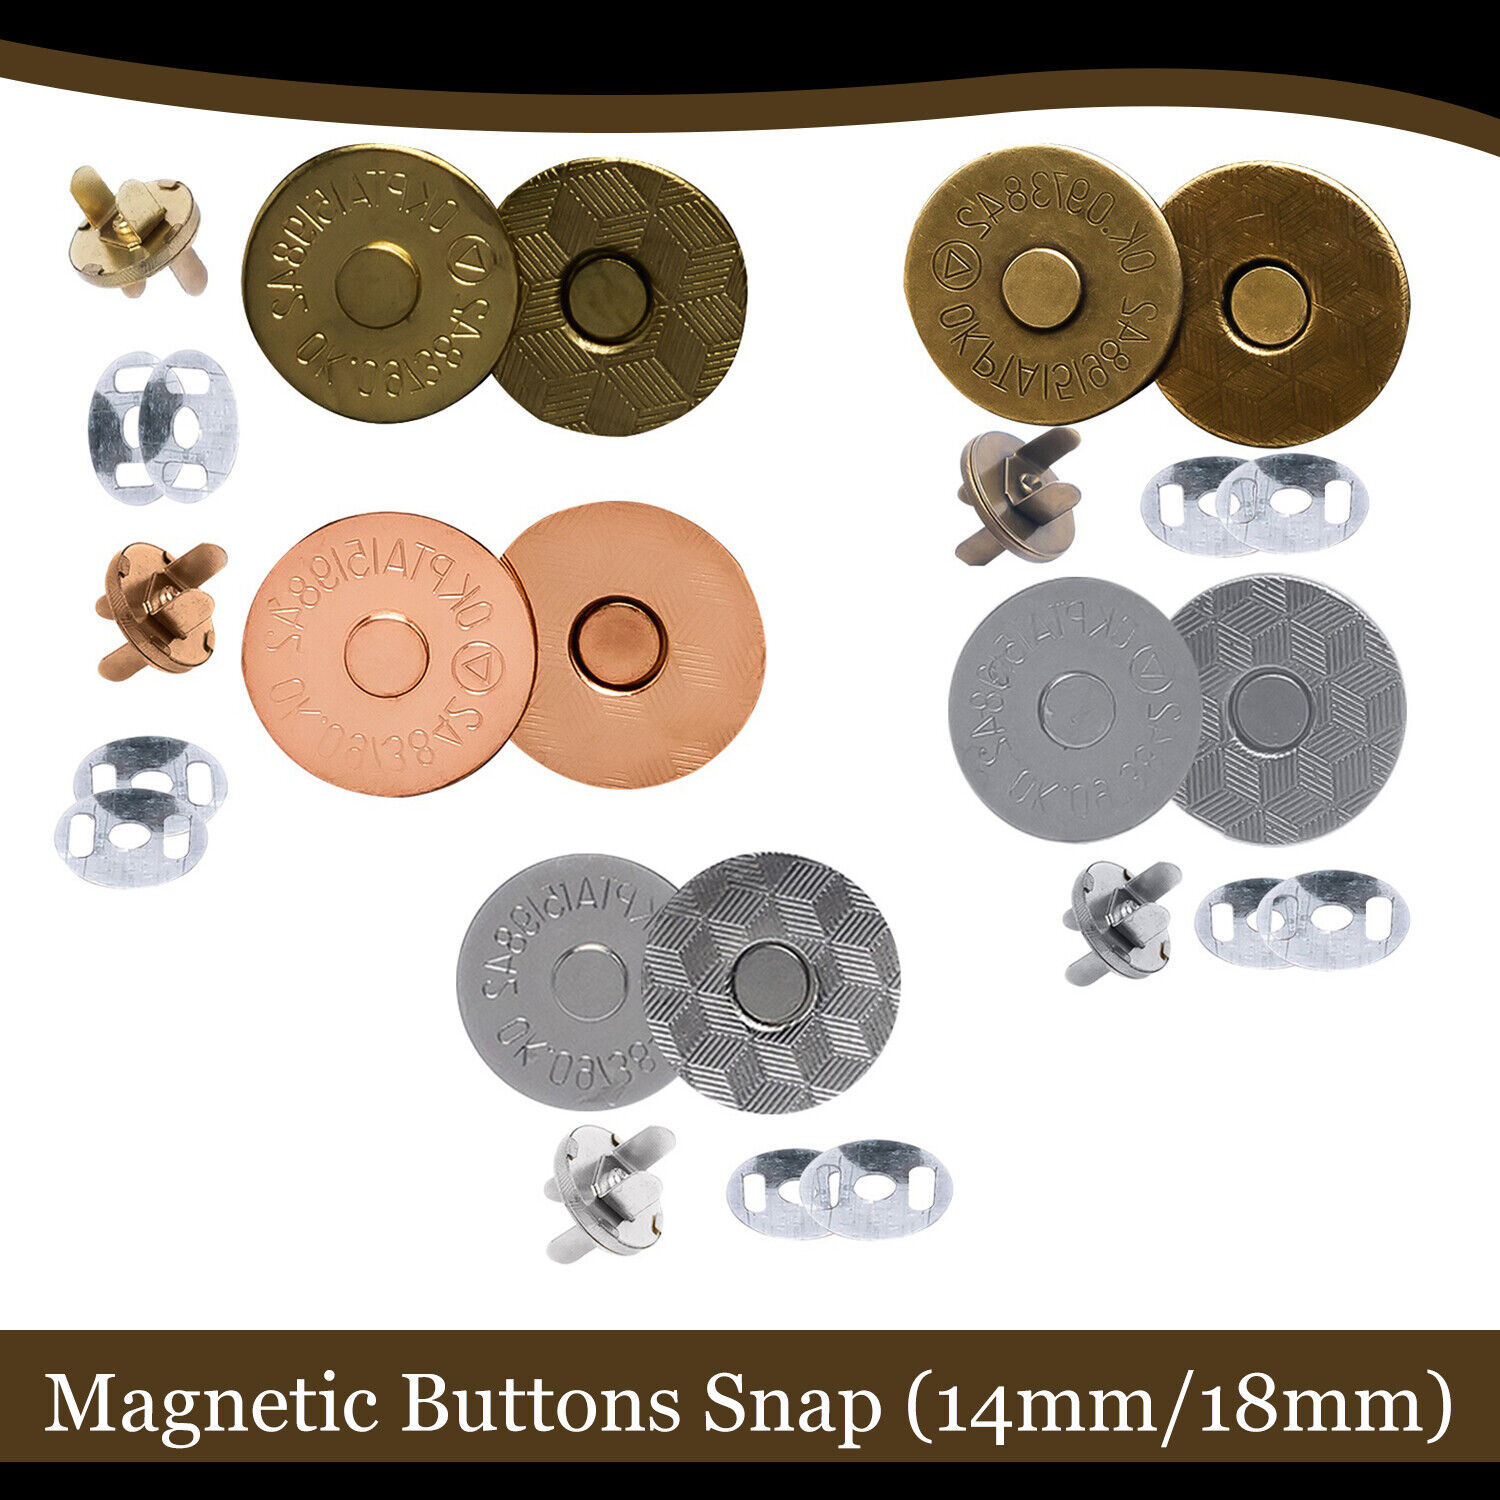 14mm/18mm MAGNETIC SNAP CLASP BUTTONS for Clothing Leather Craft Handbags  Purses